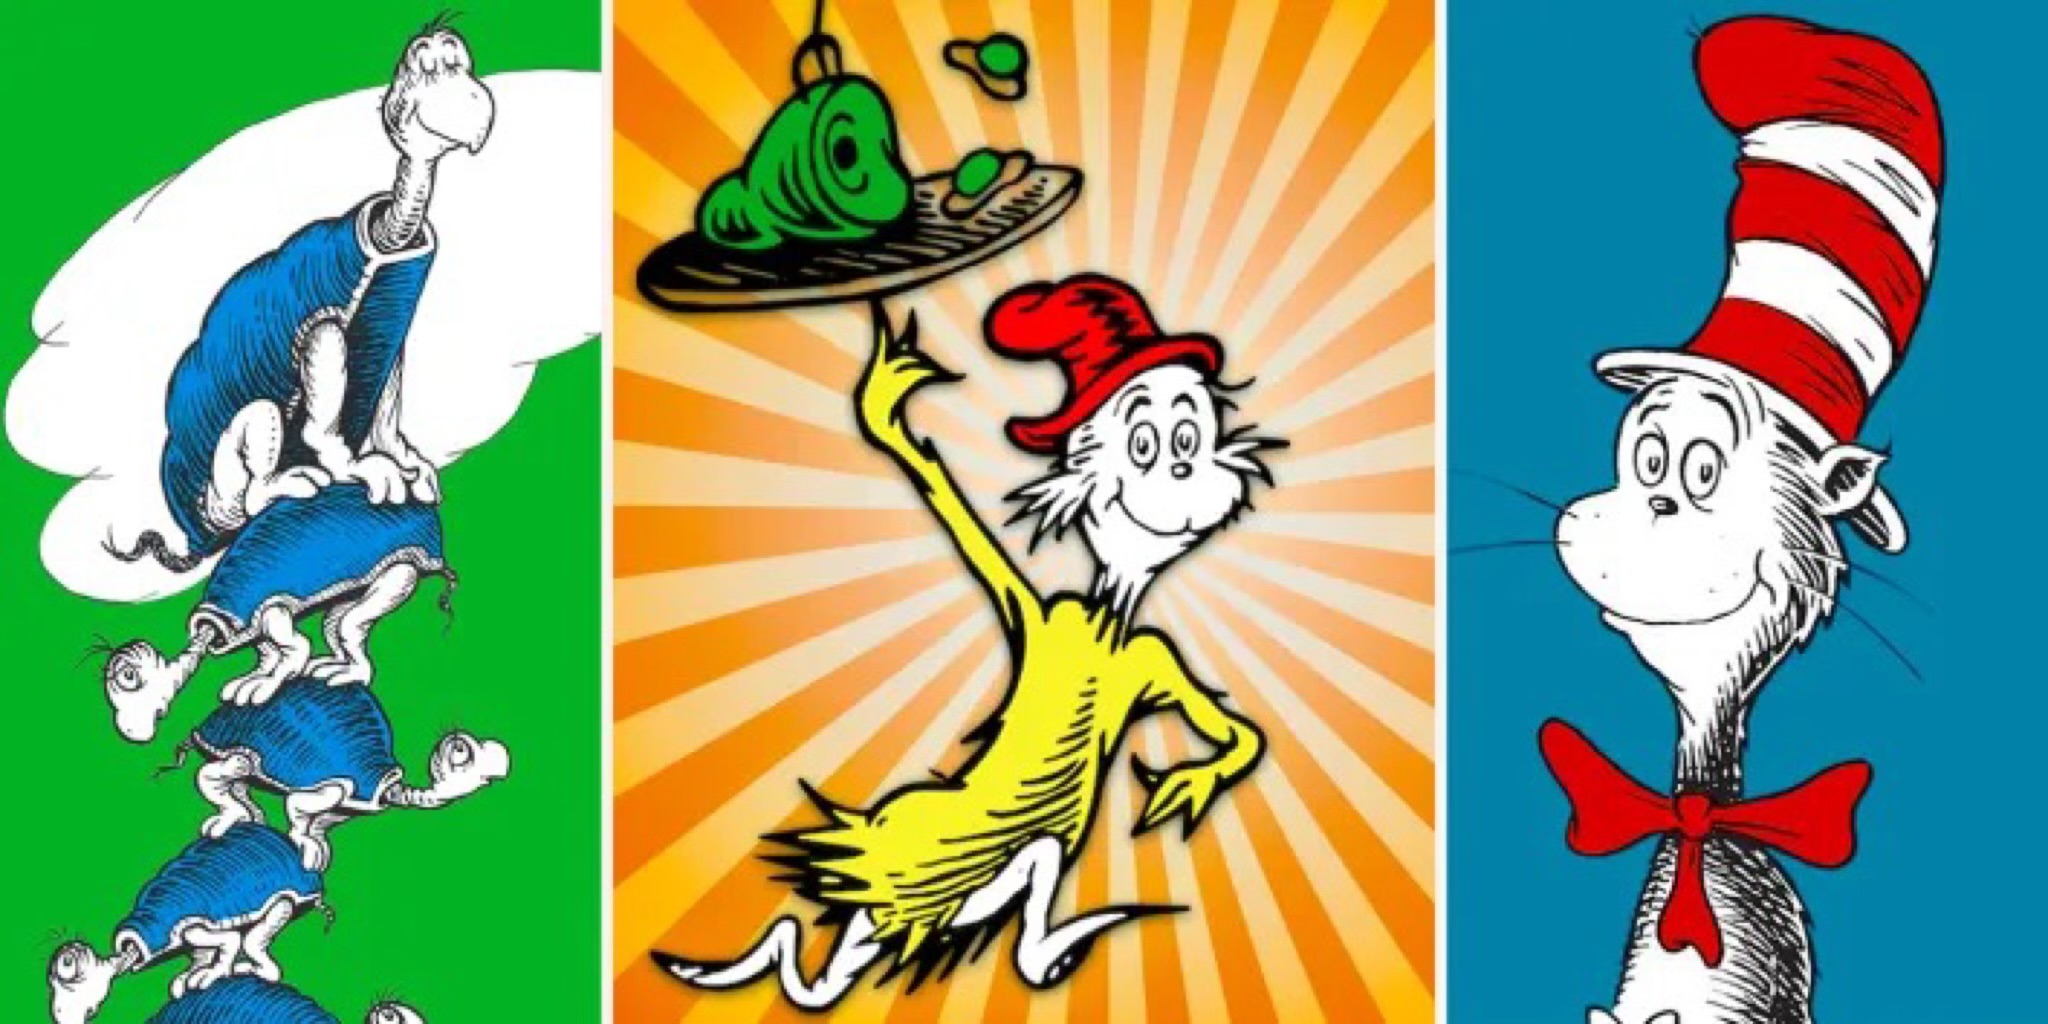 The Whimsical Characters Of Dr. Seuss's Cartoons: A Journey Into The 